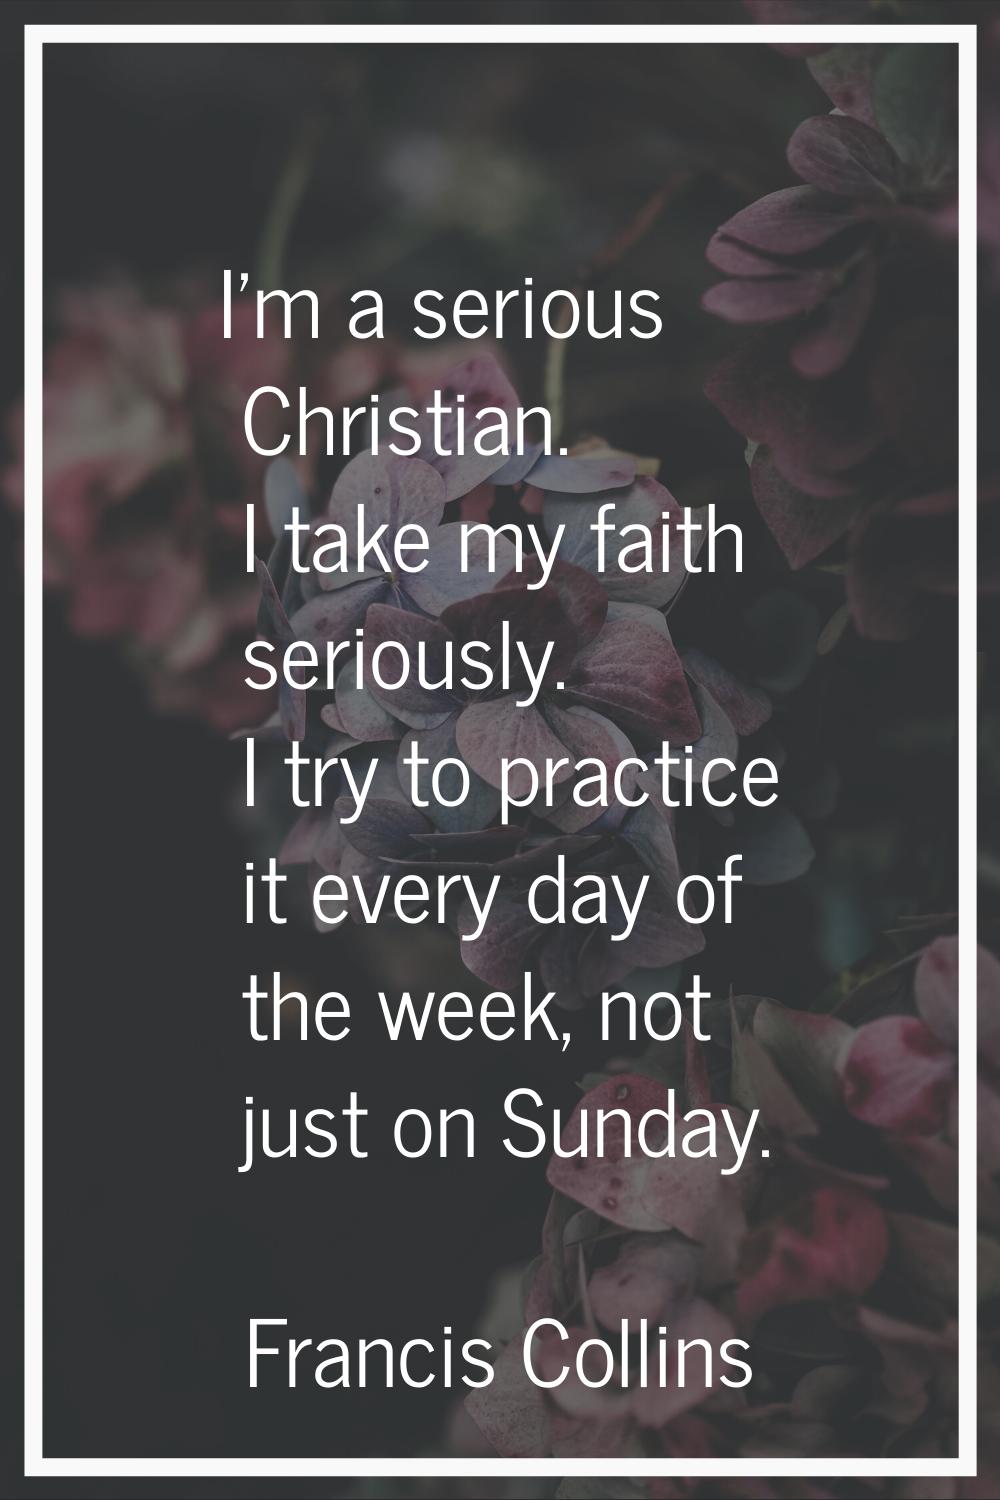 I'm a serious Christian. I take my faith seriously. I try to practice it every day of the week, not